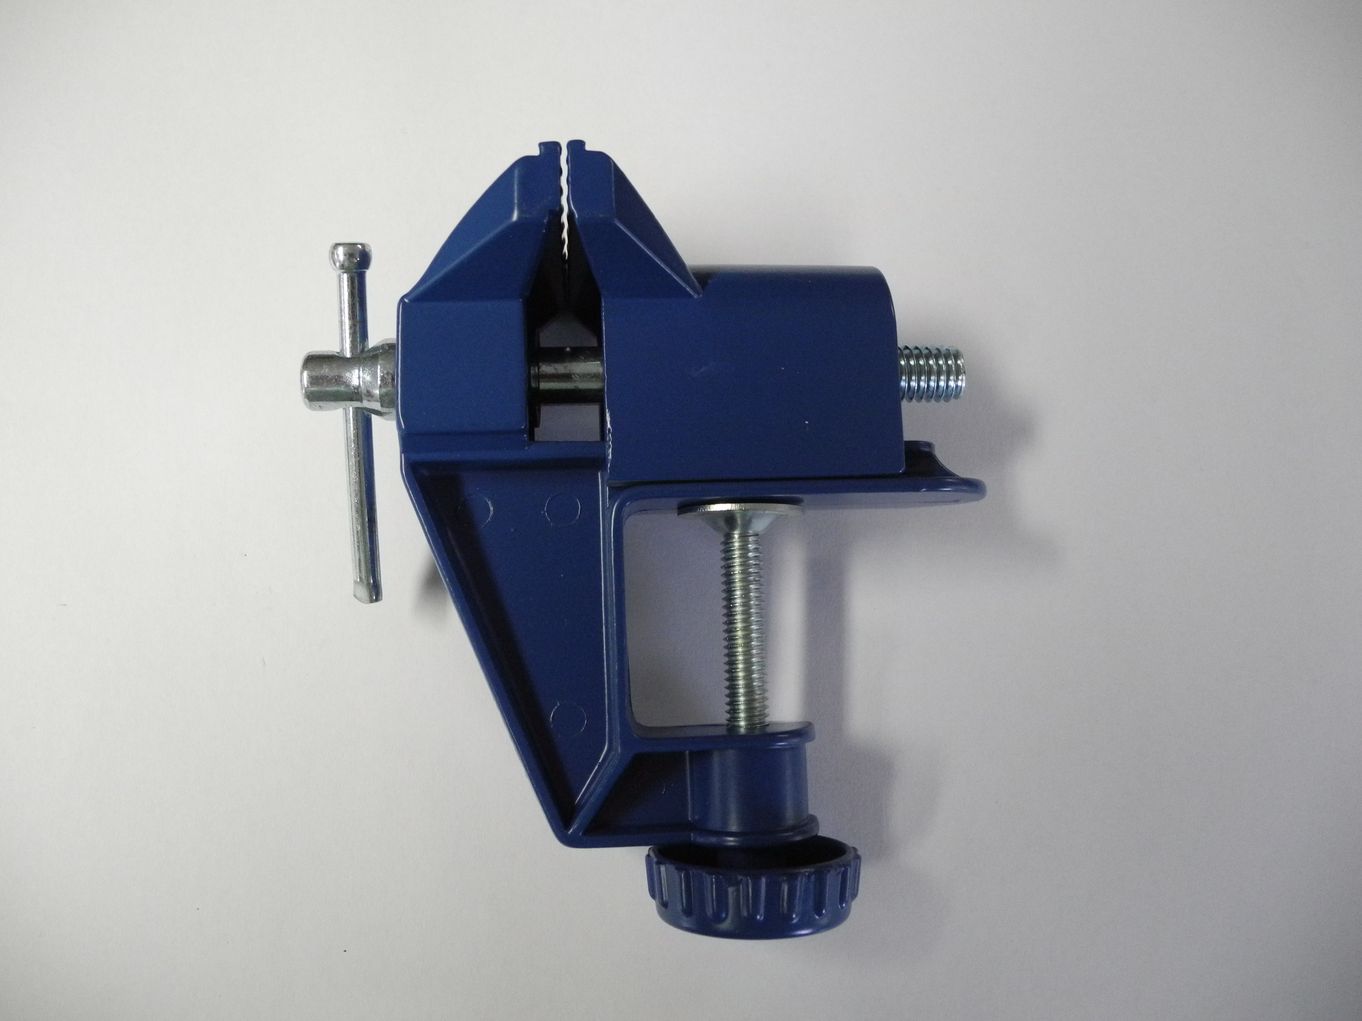 Proxxon Precision Vise for a great price - Metal Clay & Crafted Findings